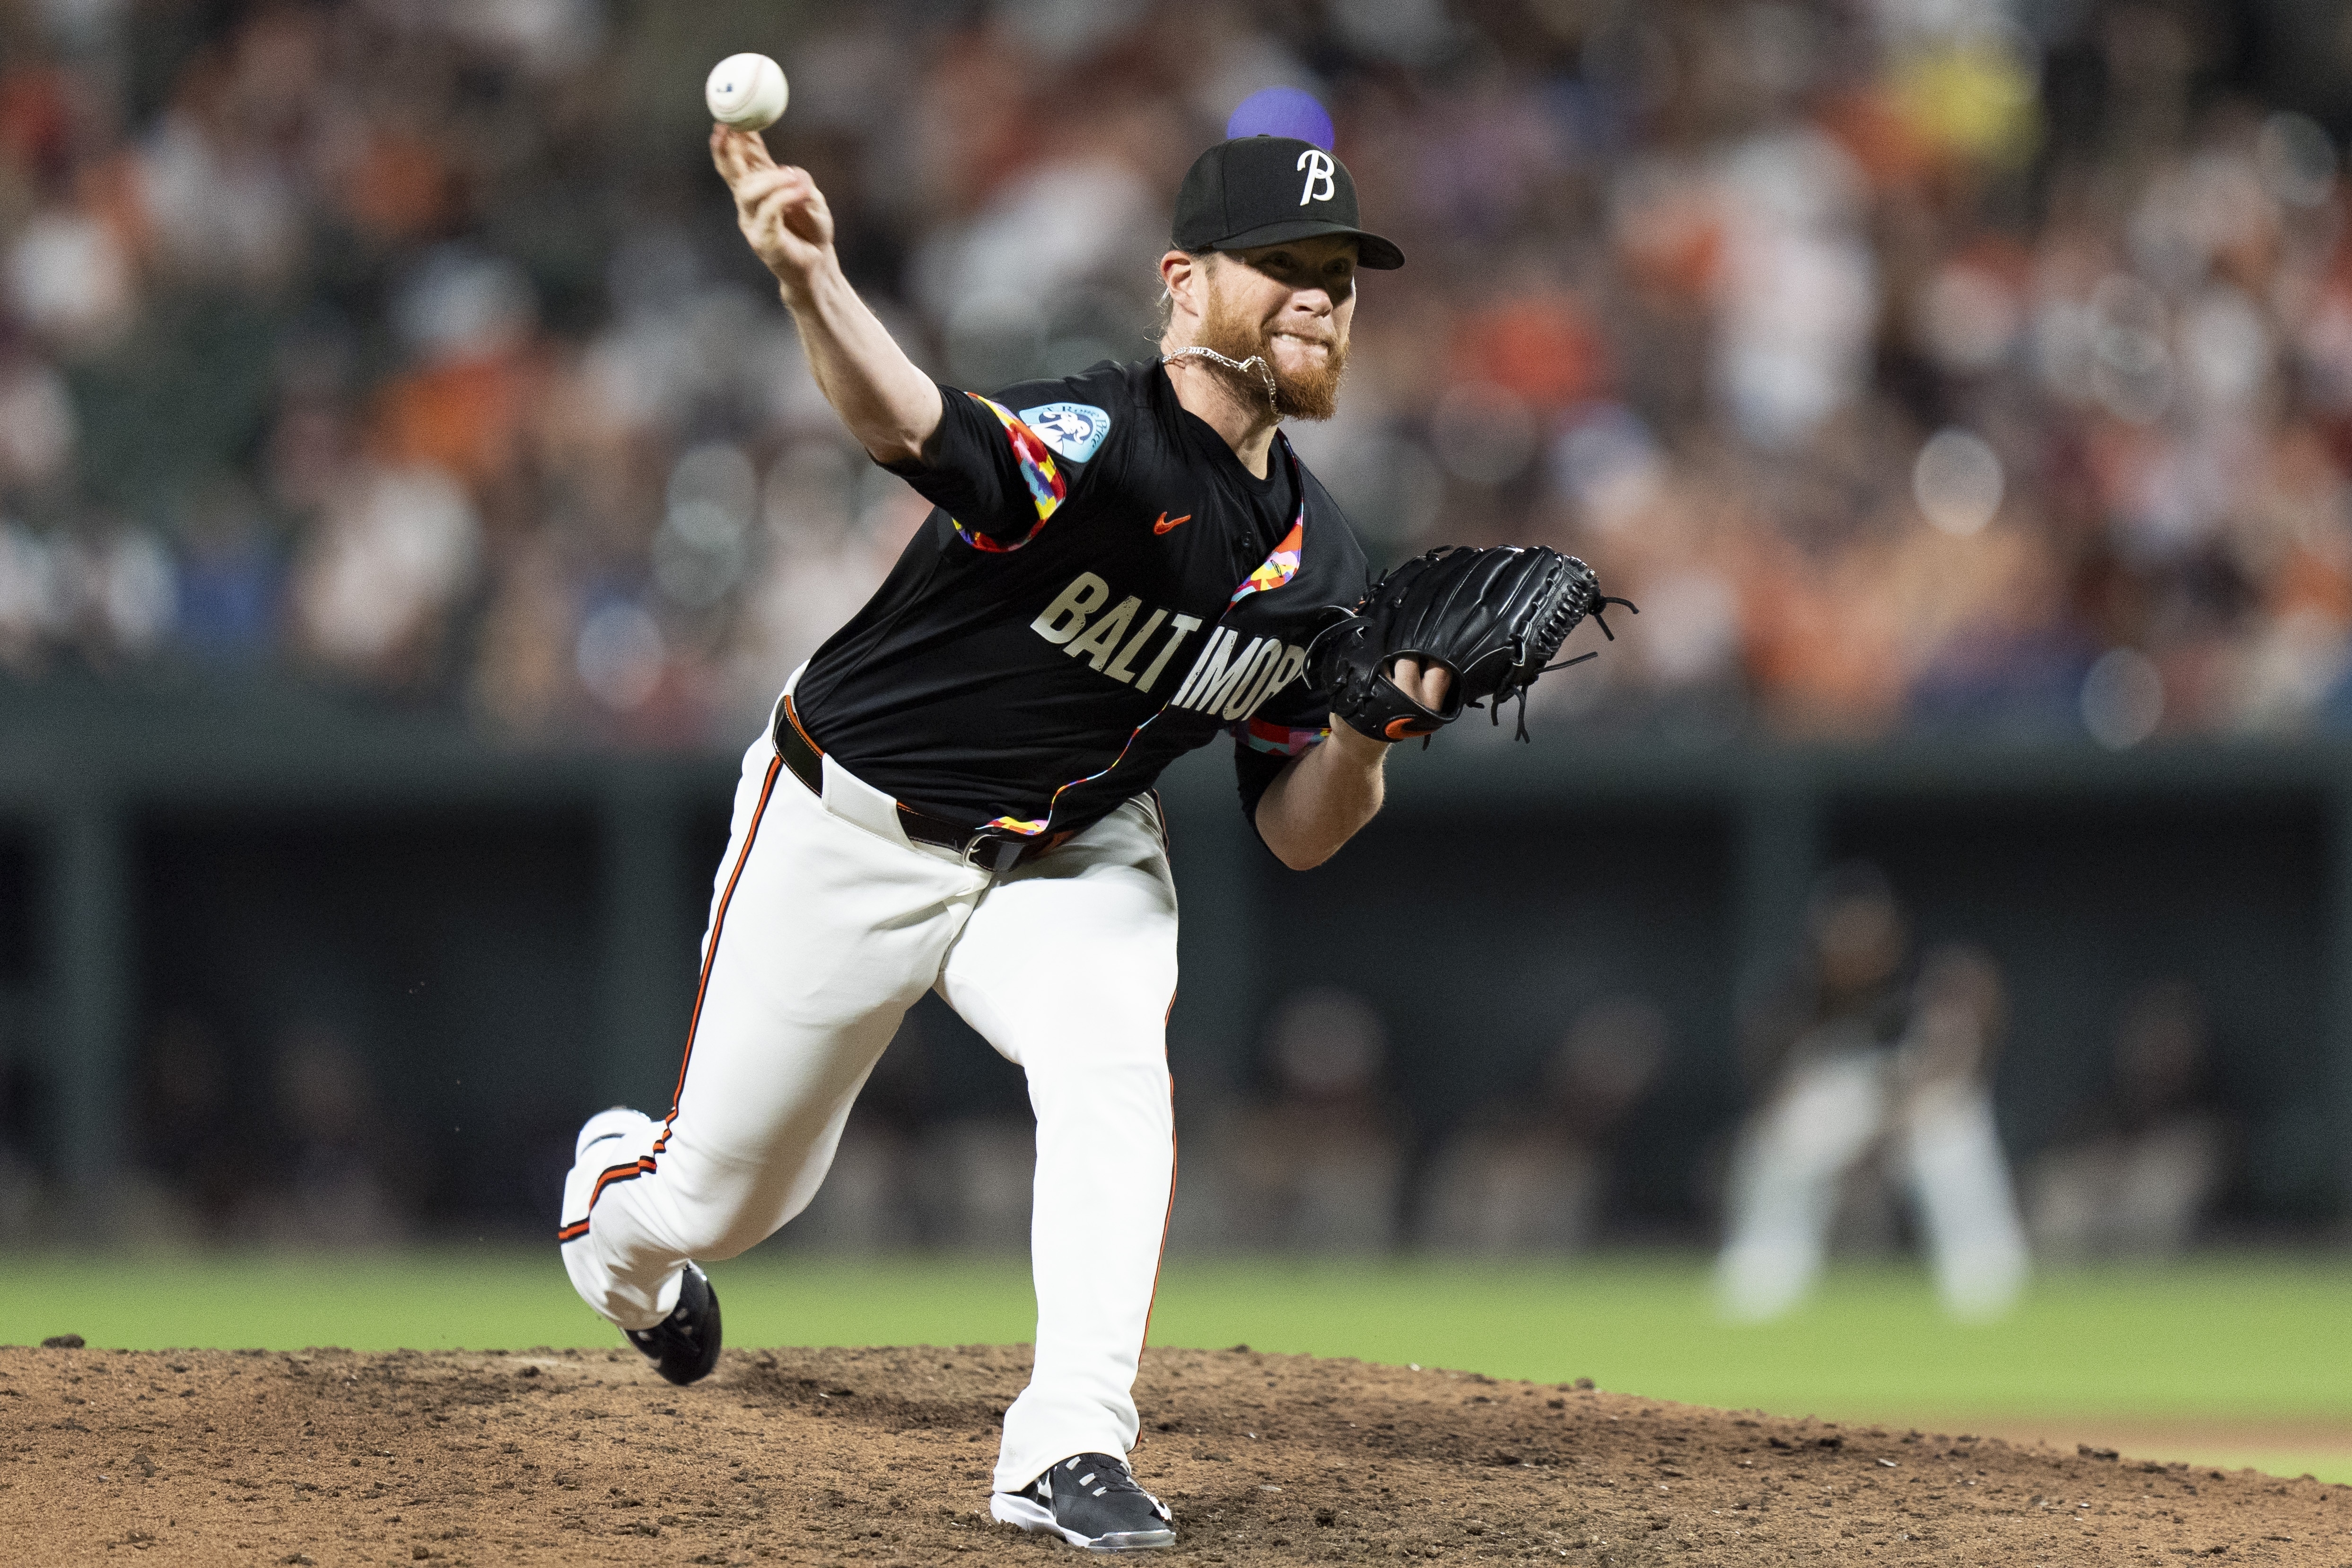 Orioles relief pitcher Craig Kimbrel picked up his 435th career save Friday against the Rangers. (AP Photo/Stephanie Scarbrough)